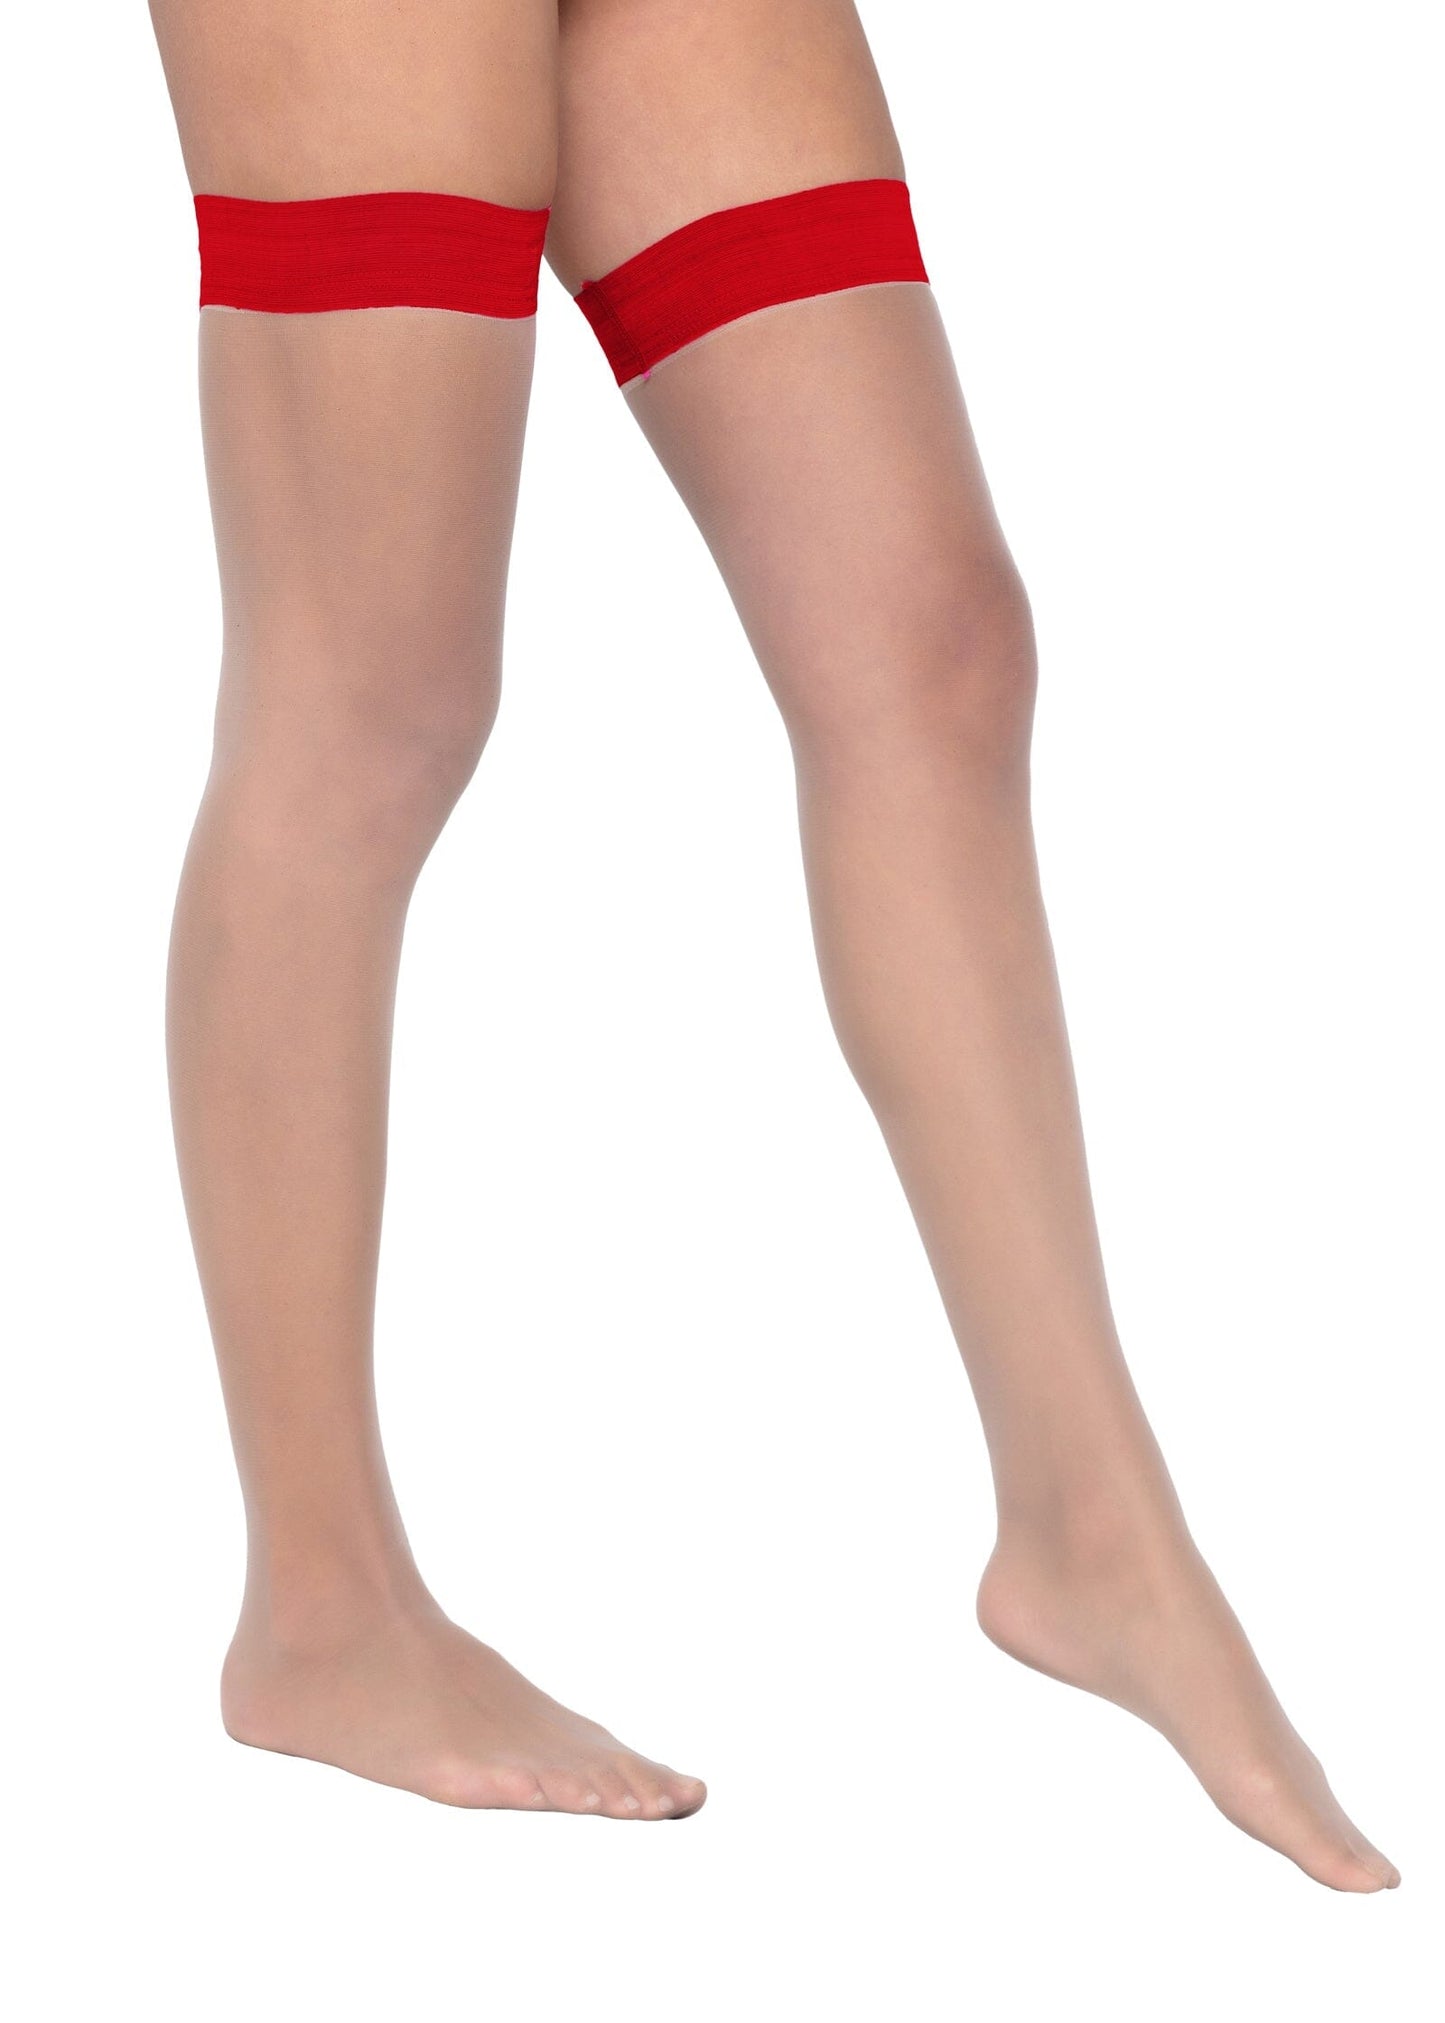 LI539 - Colored Stay up Stockings Exotic Peach One Size Red 